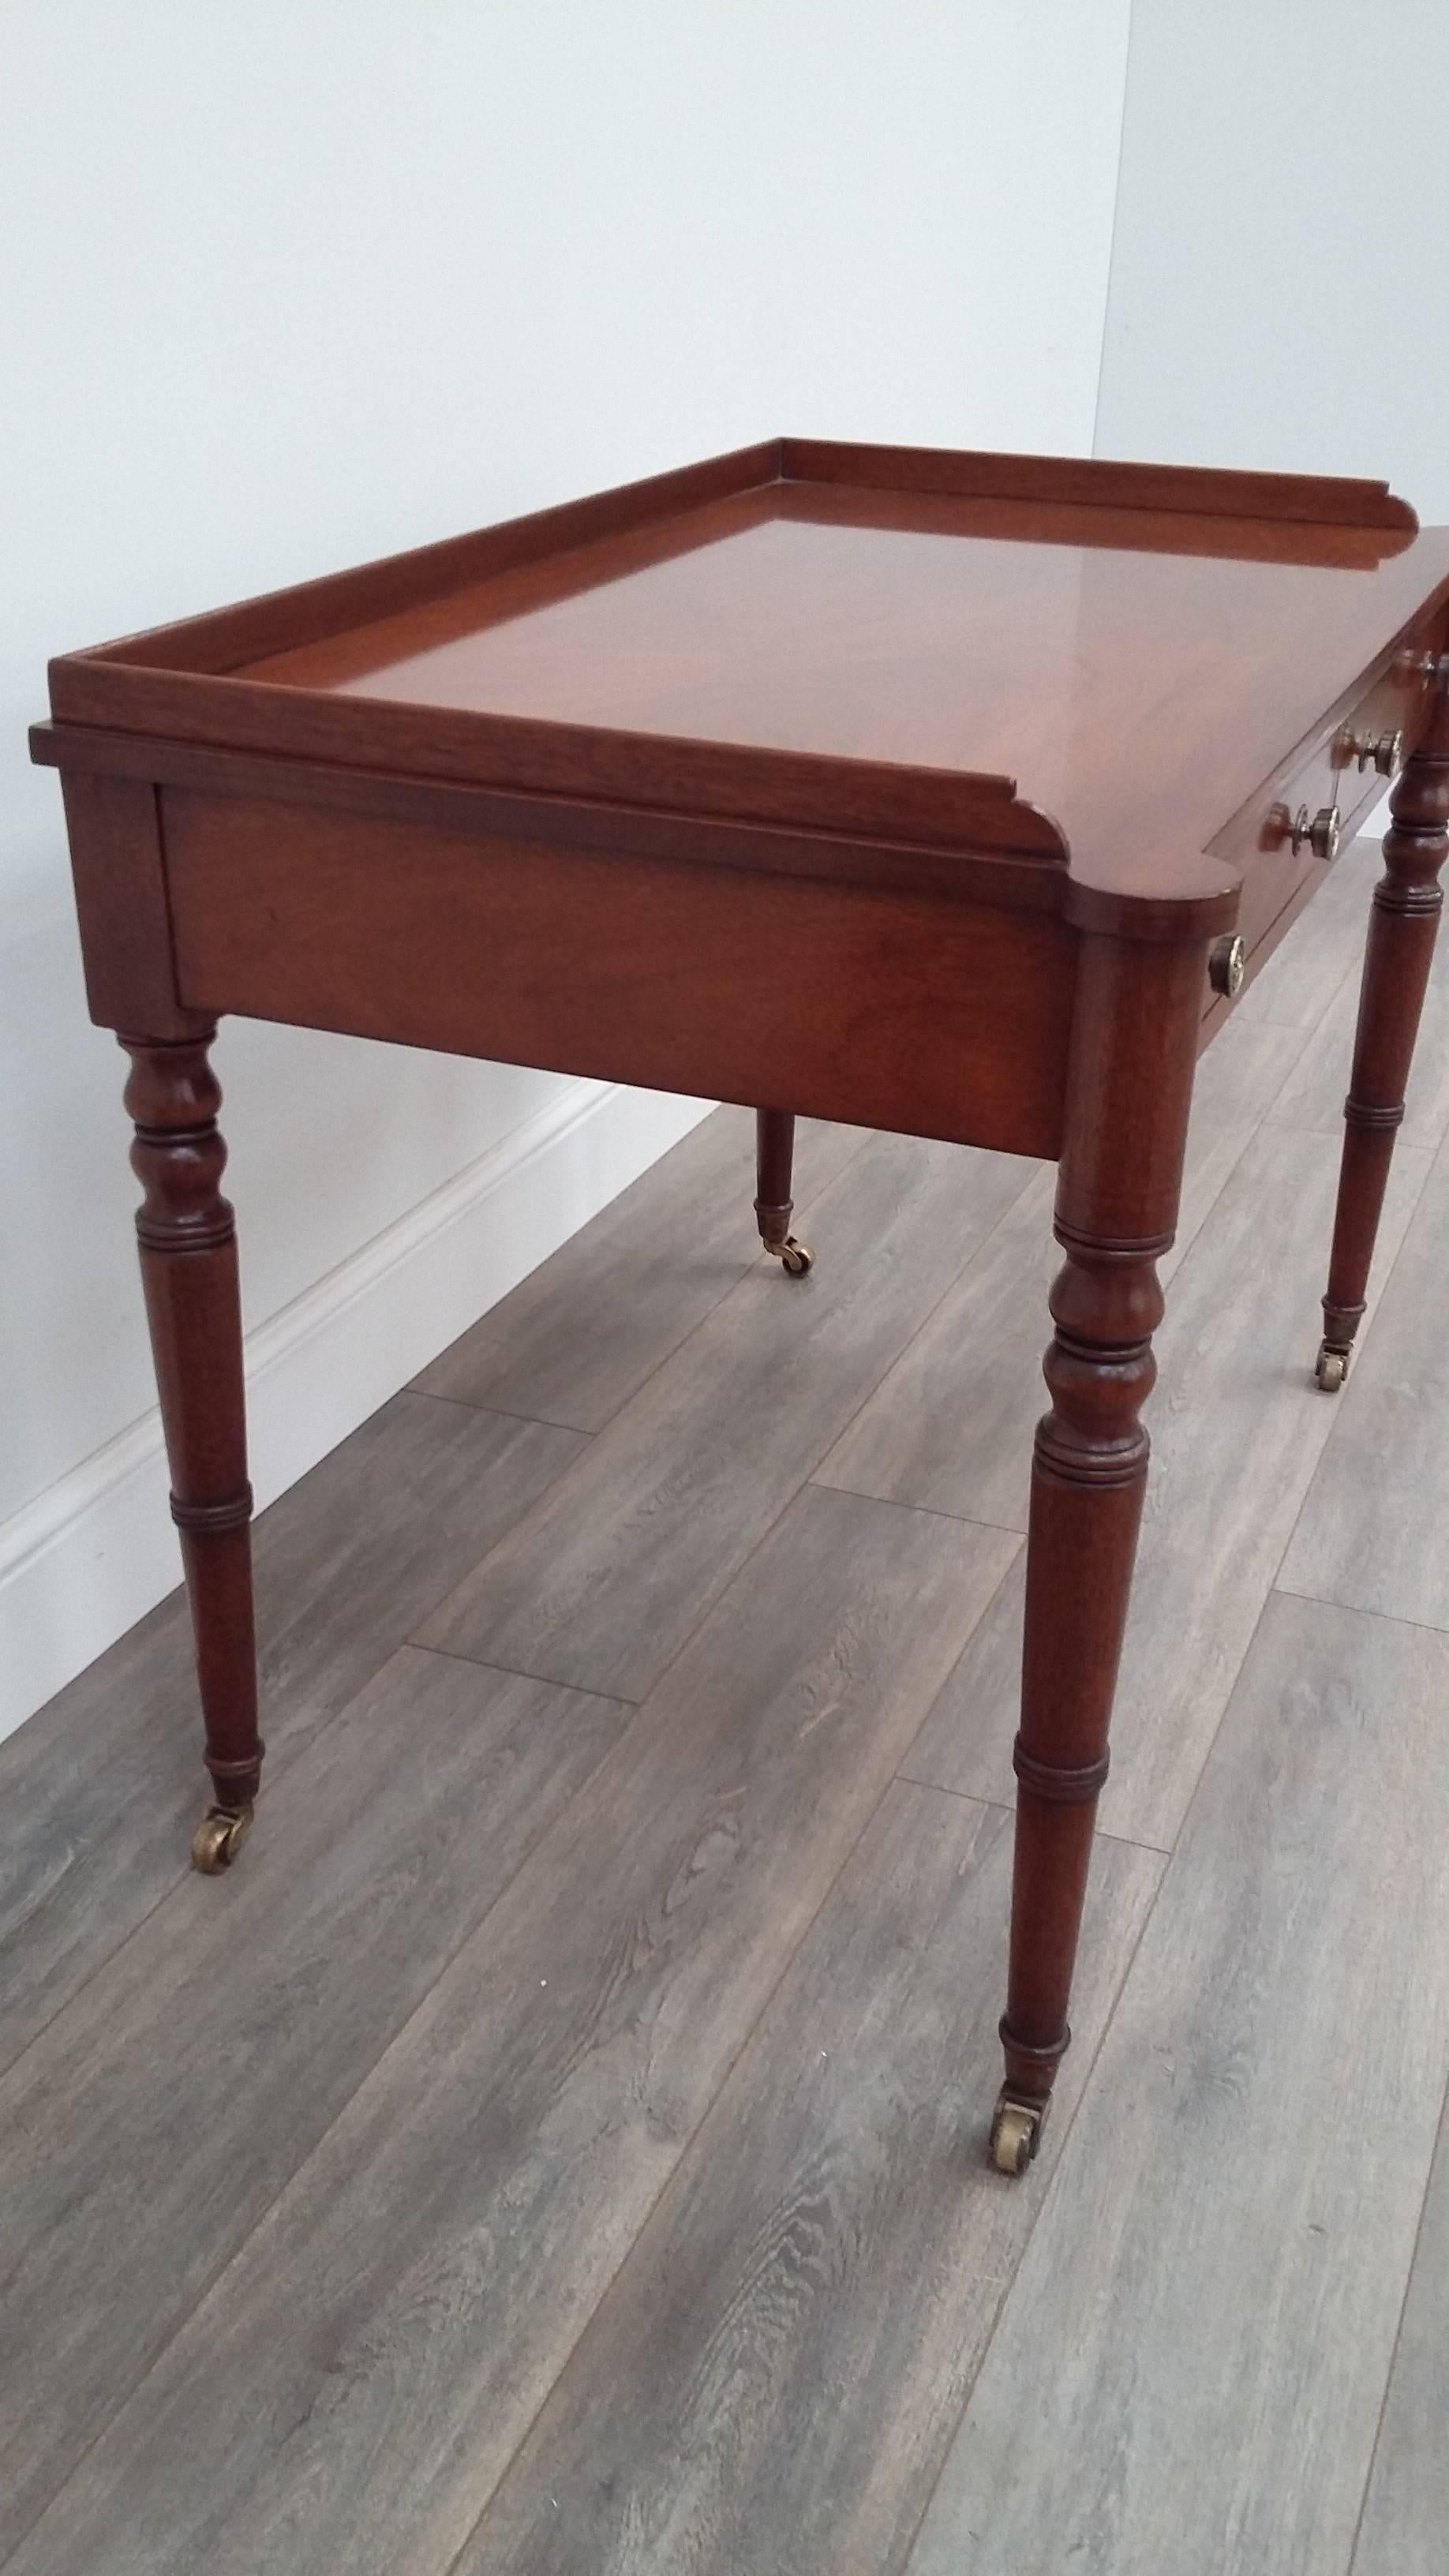 Contemporary Arthur Brett Mahogany Serving Table with Two Drawers on Brass Castors For Sale